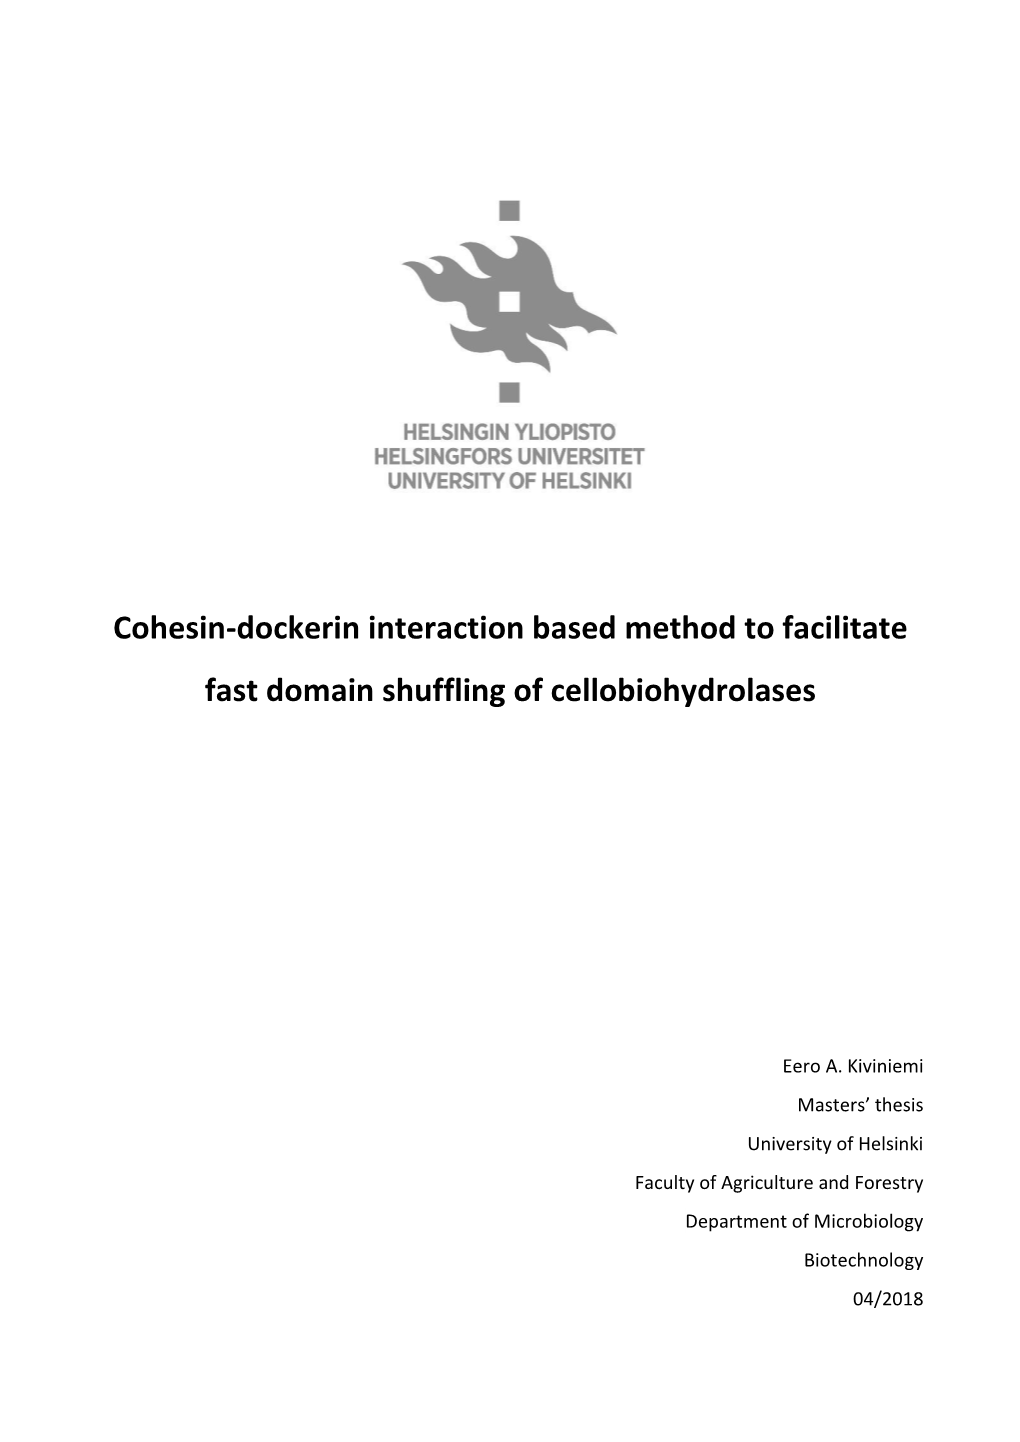 Cohesin-Dockerin Interaction Based Method to Facilitate Fast Domain Shuffling of Cellobiohydrolases